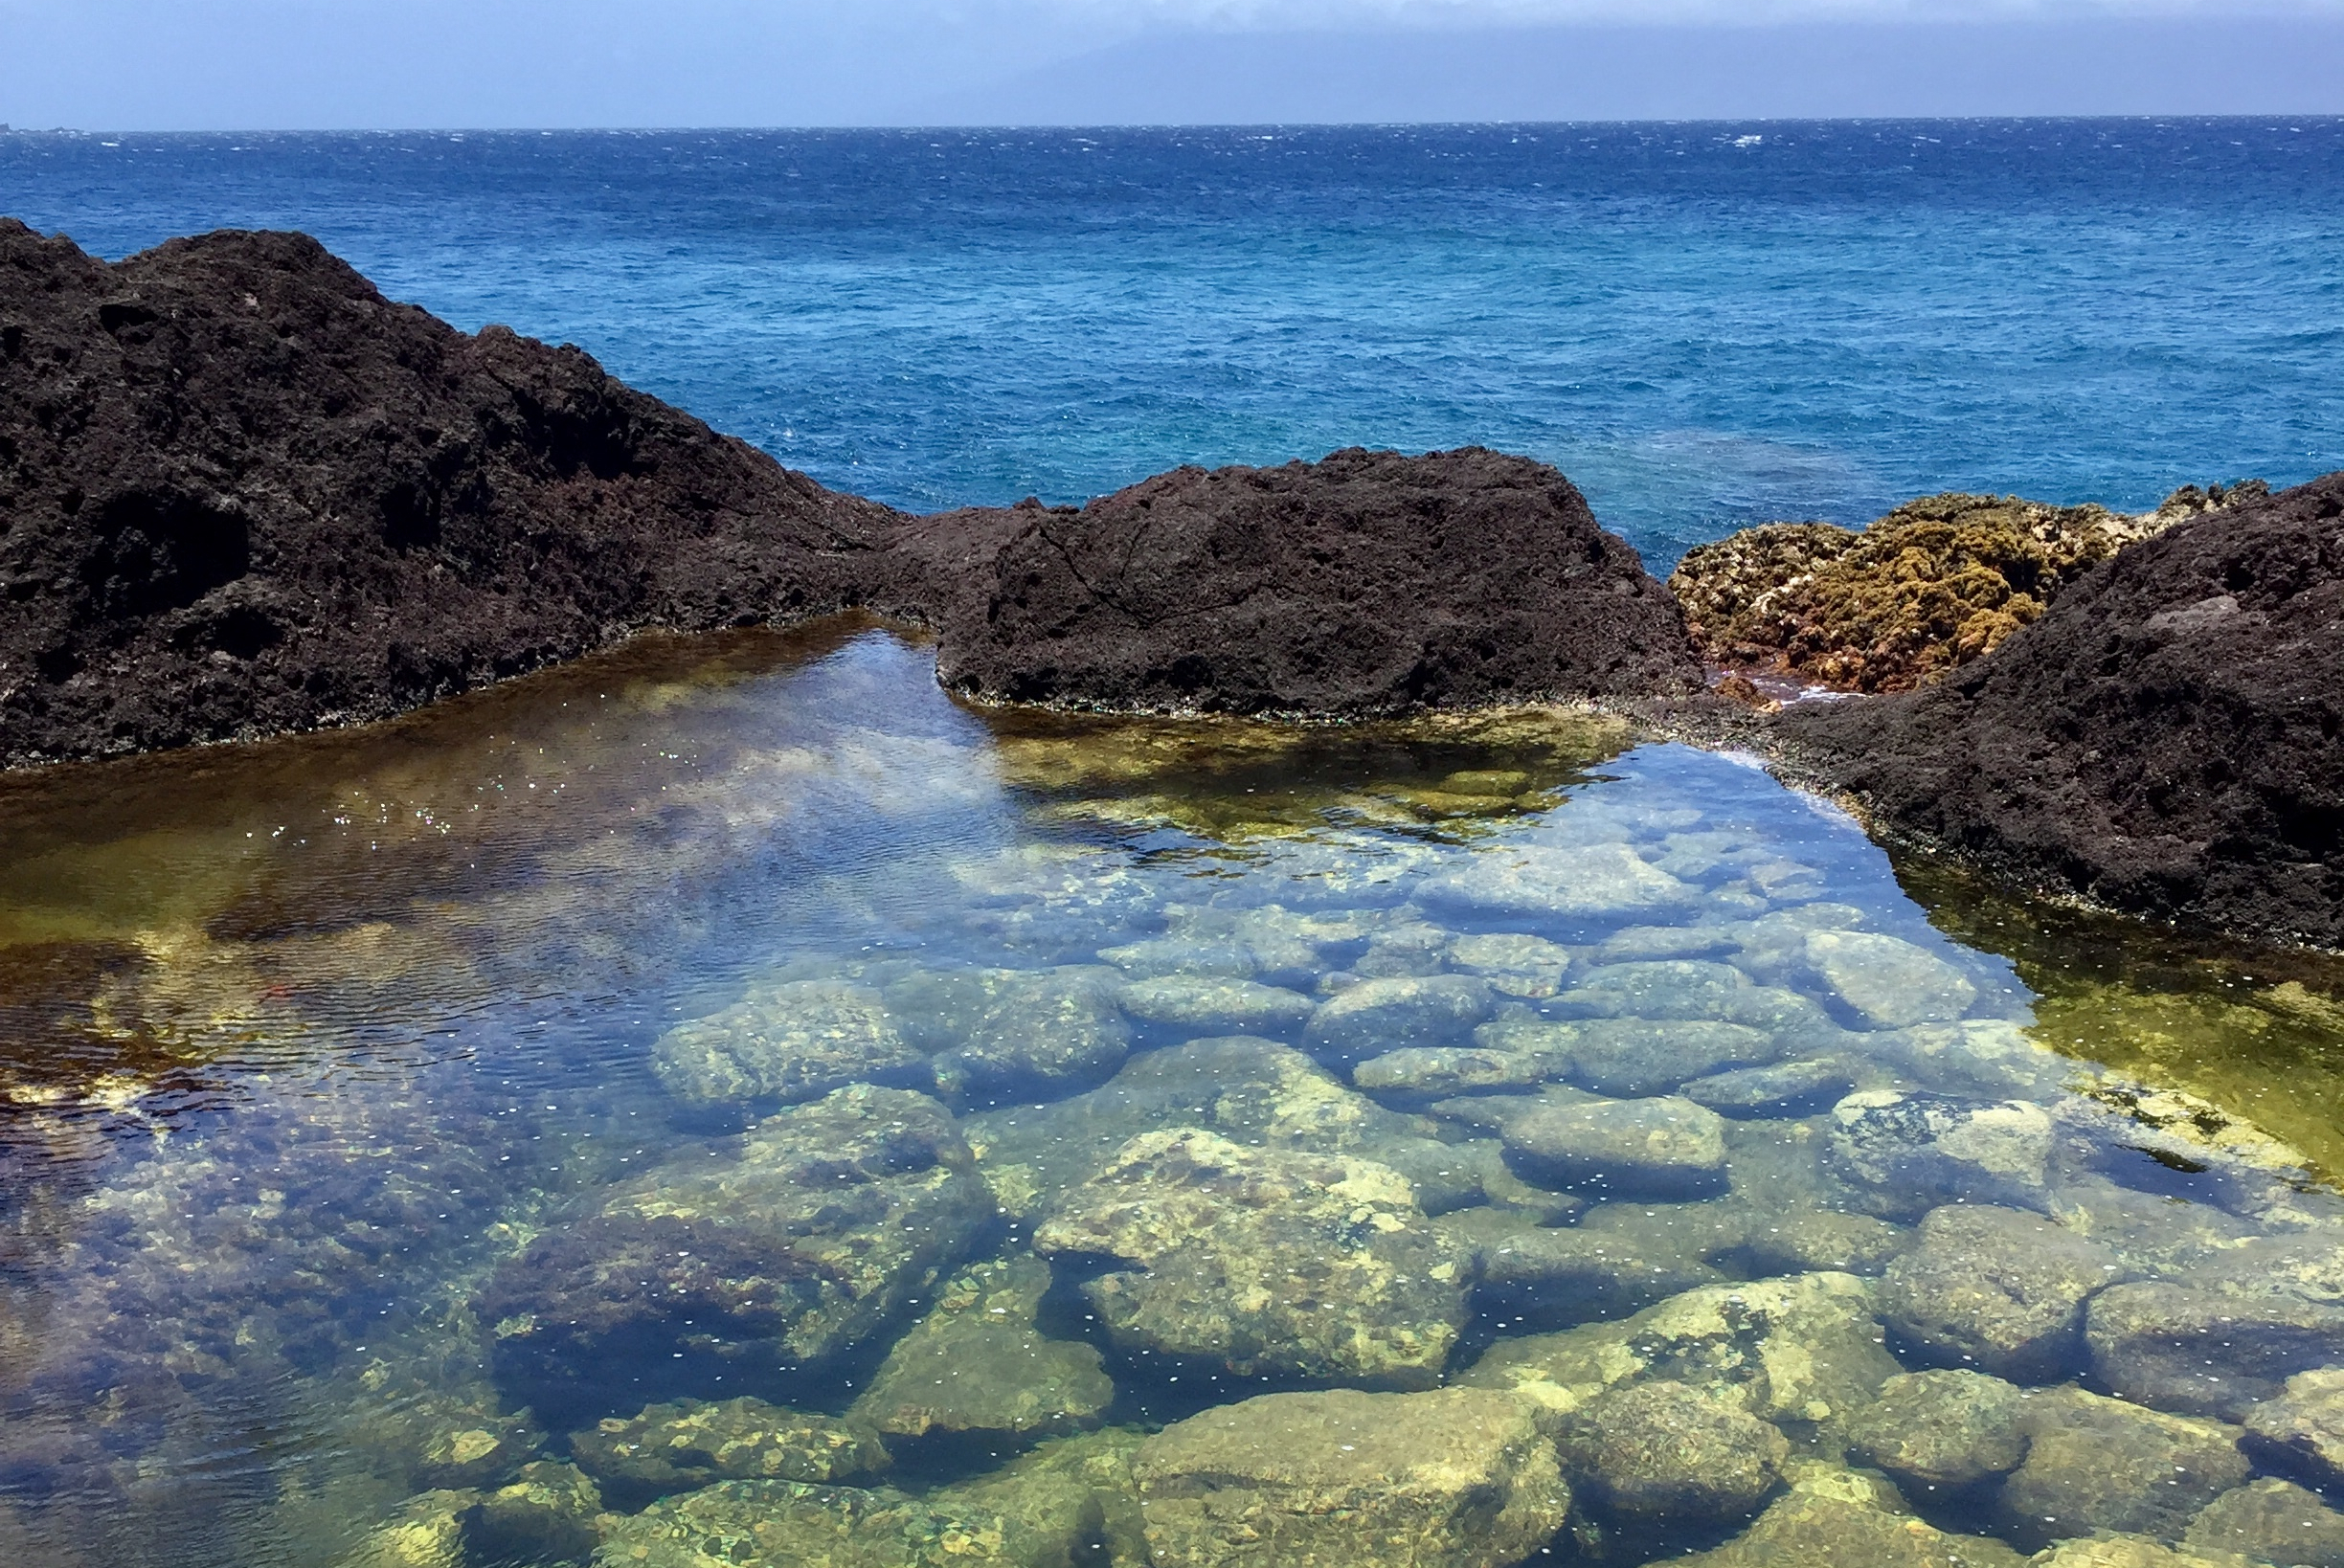 <p>You'll have to find a local to tell you where the entrance to Maui's Chutes and Ladders is. The approach down 40 feet of slippery cliff is extremely dangerous and has caused many injuries—but the pool at the end is undeniable.</p>